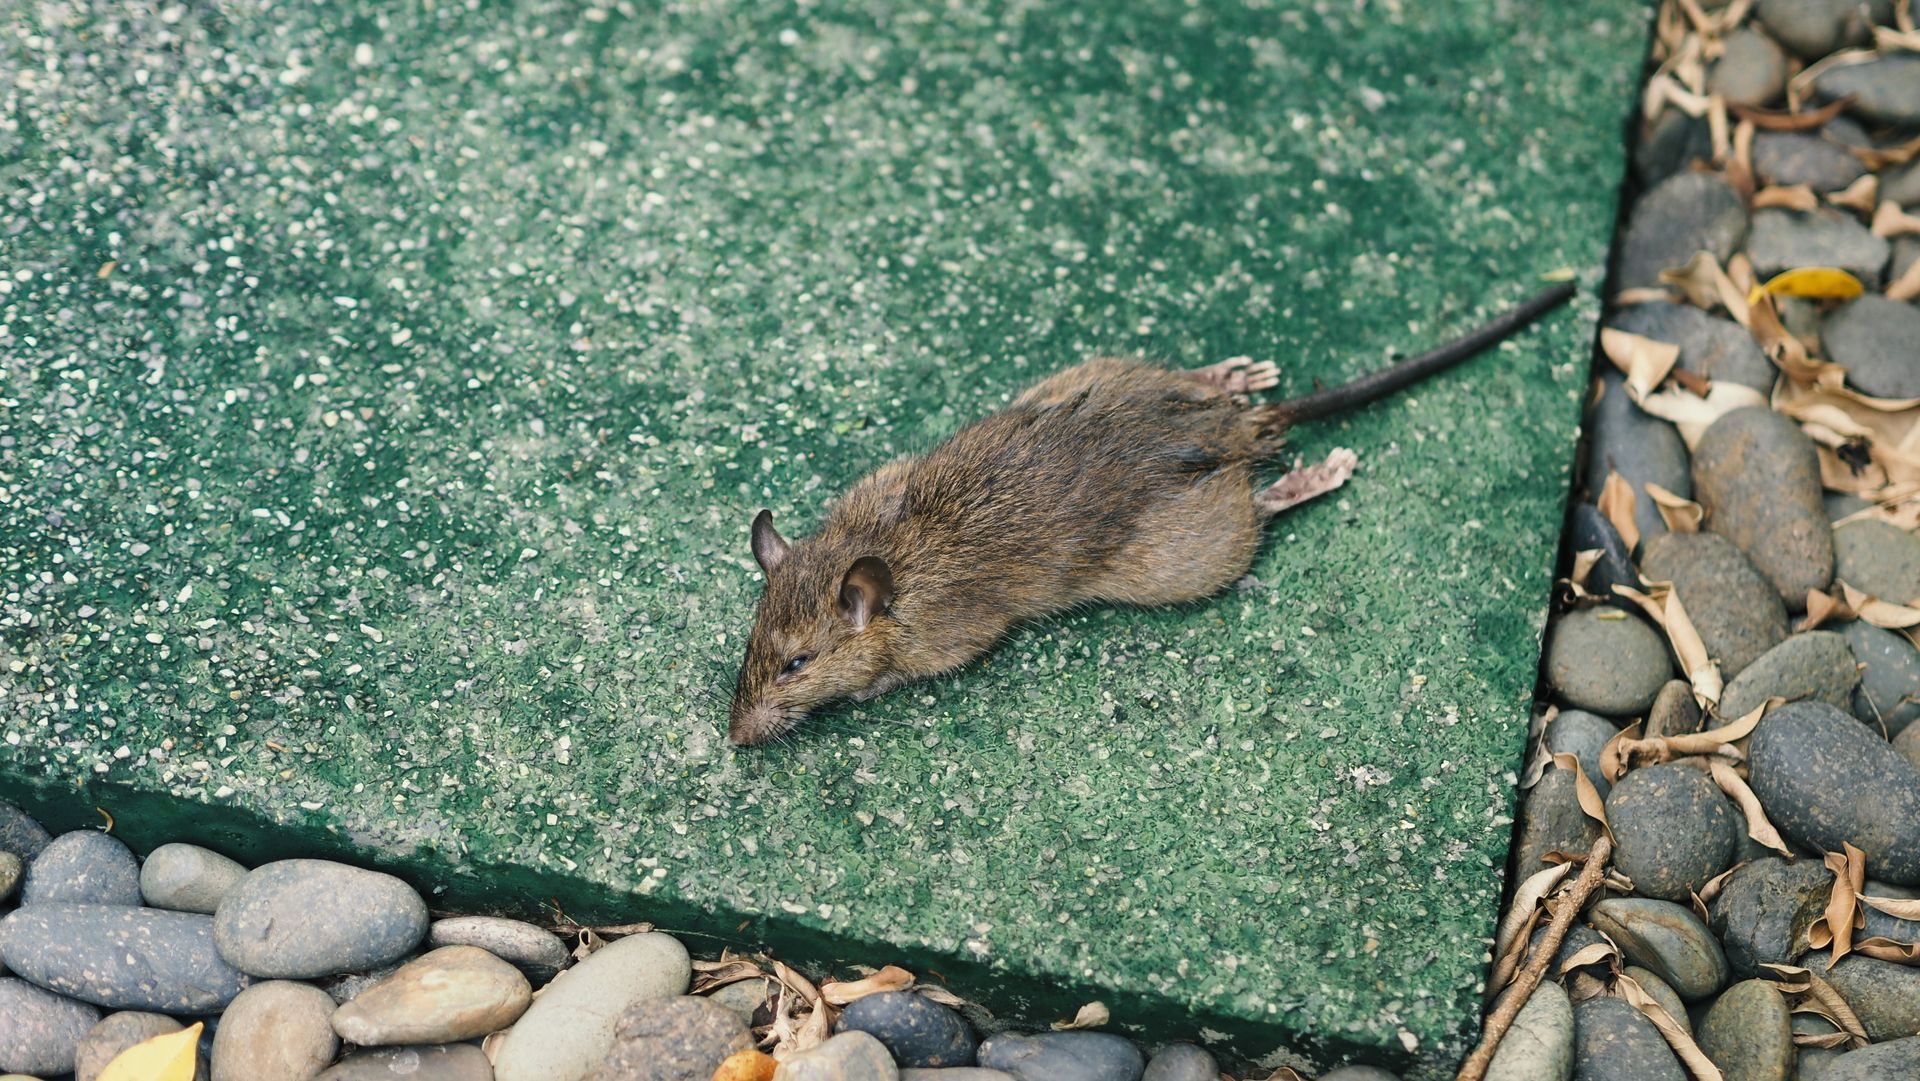 Small brown mouse is laying on a green surface